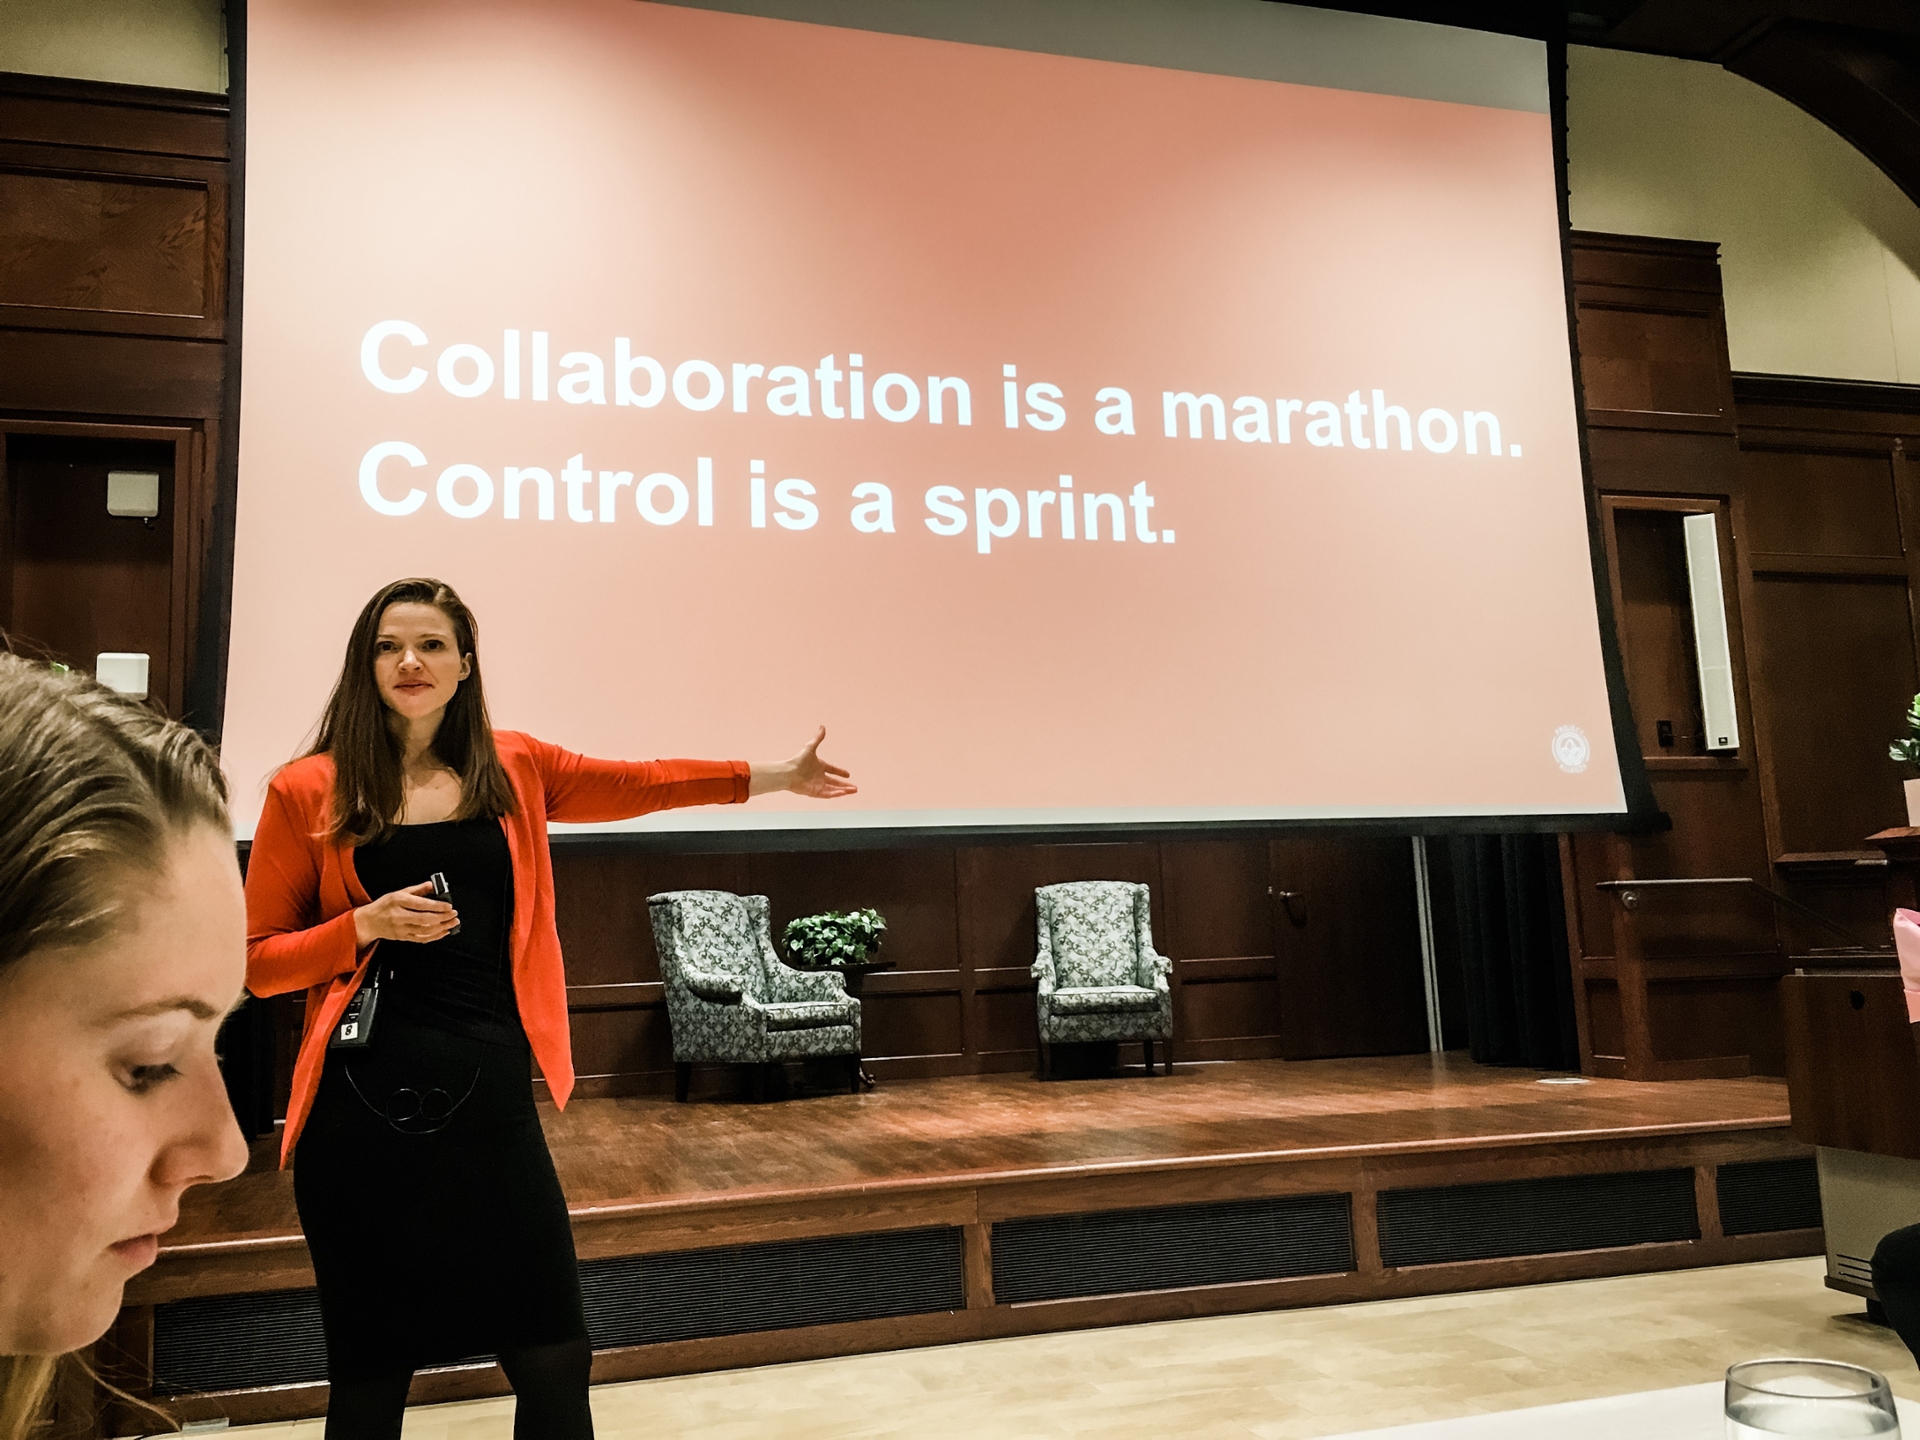 Kristin van Busum speaking at a Women's Leadership event, with a screen in the background that reads "Collaboration is a marathon. Control is a sprint."